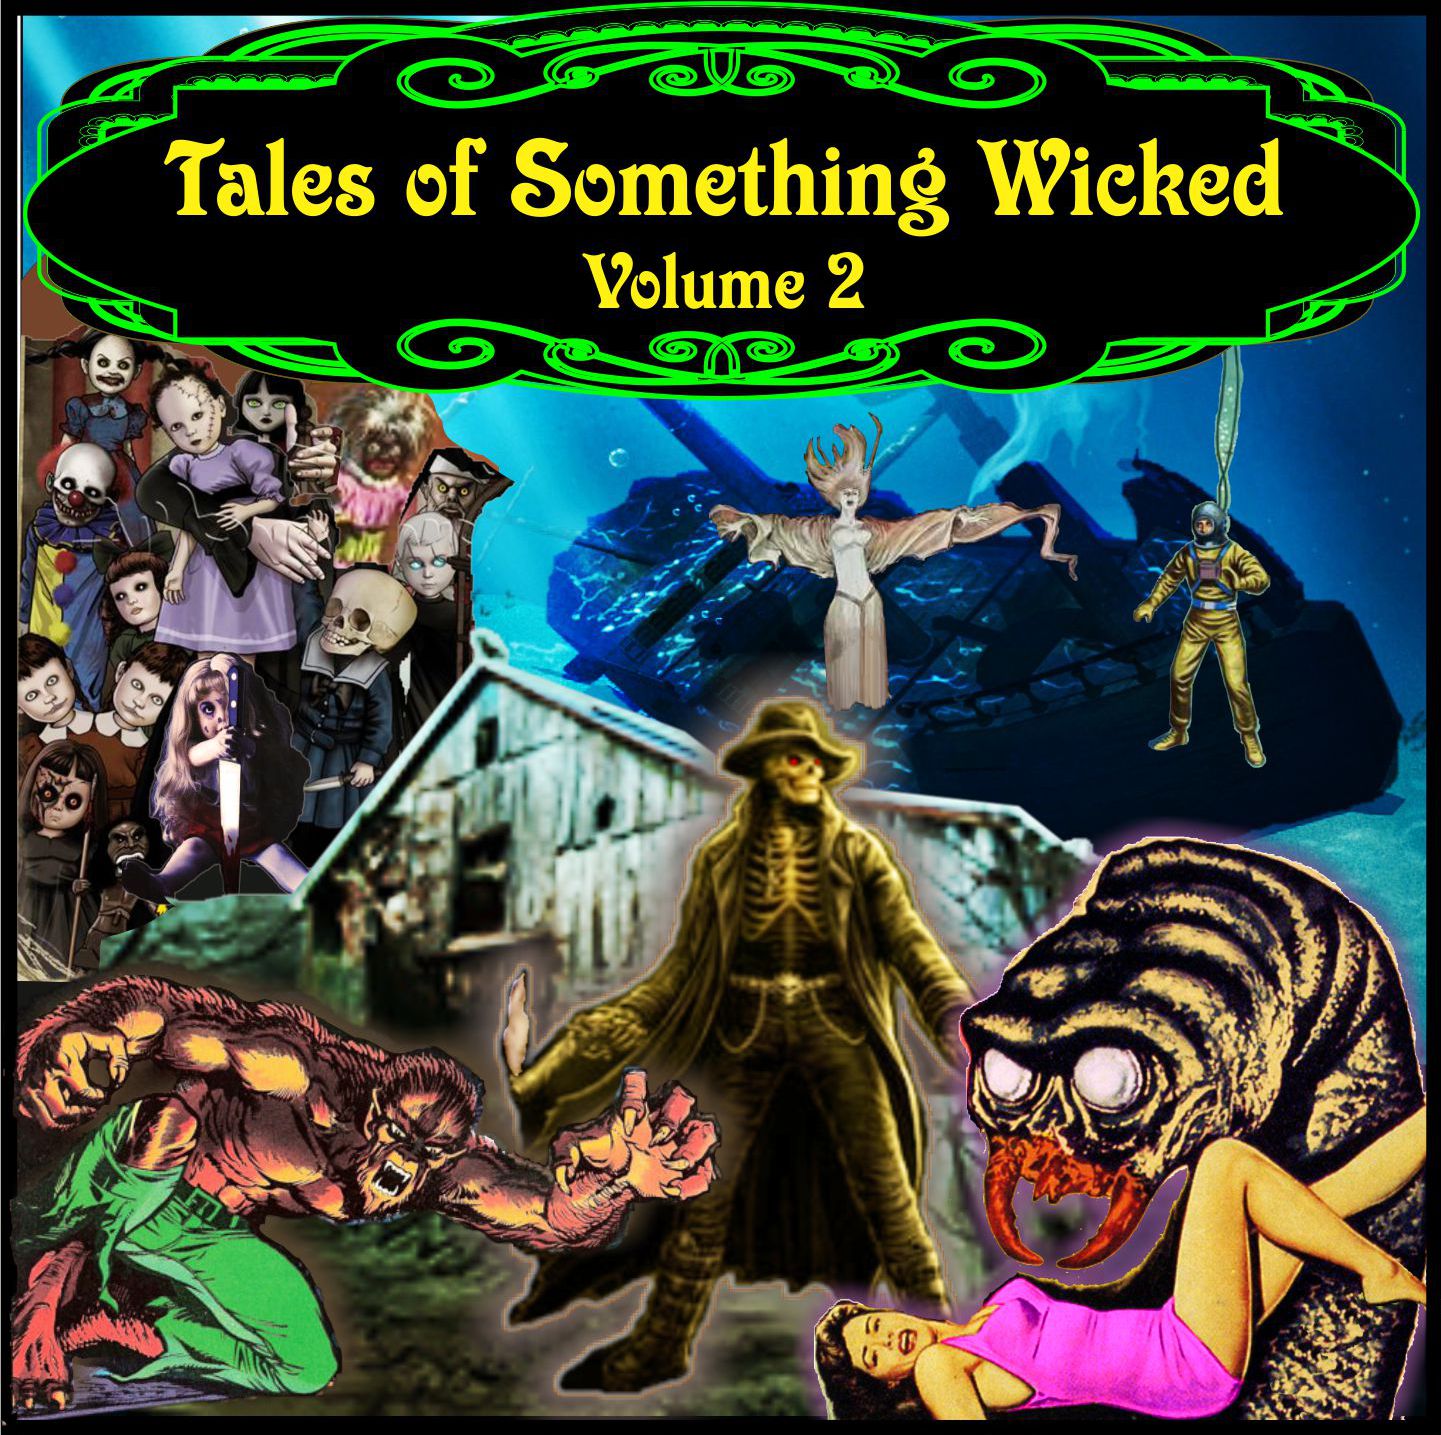 Tales of Something Wicked Vol. 1